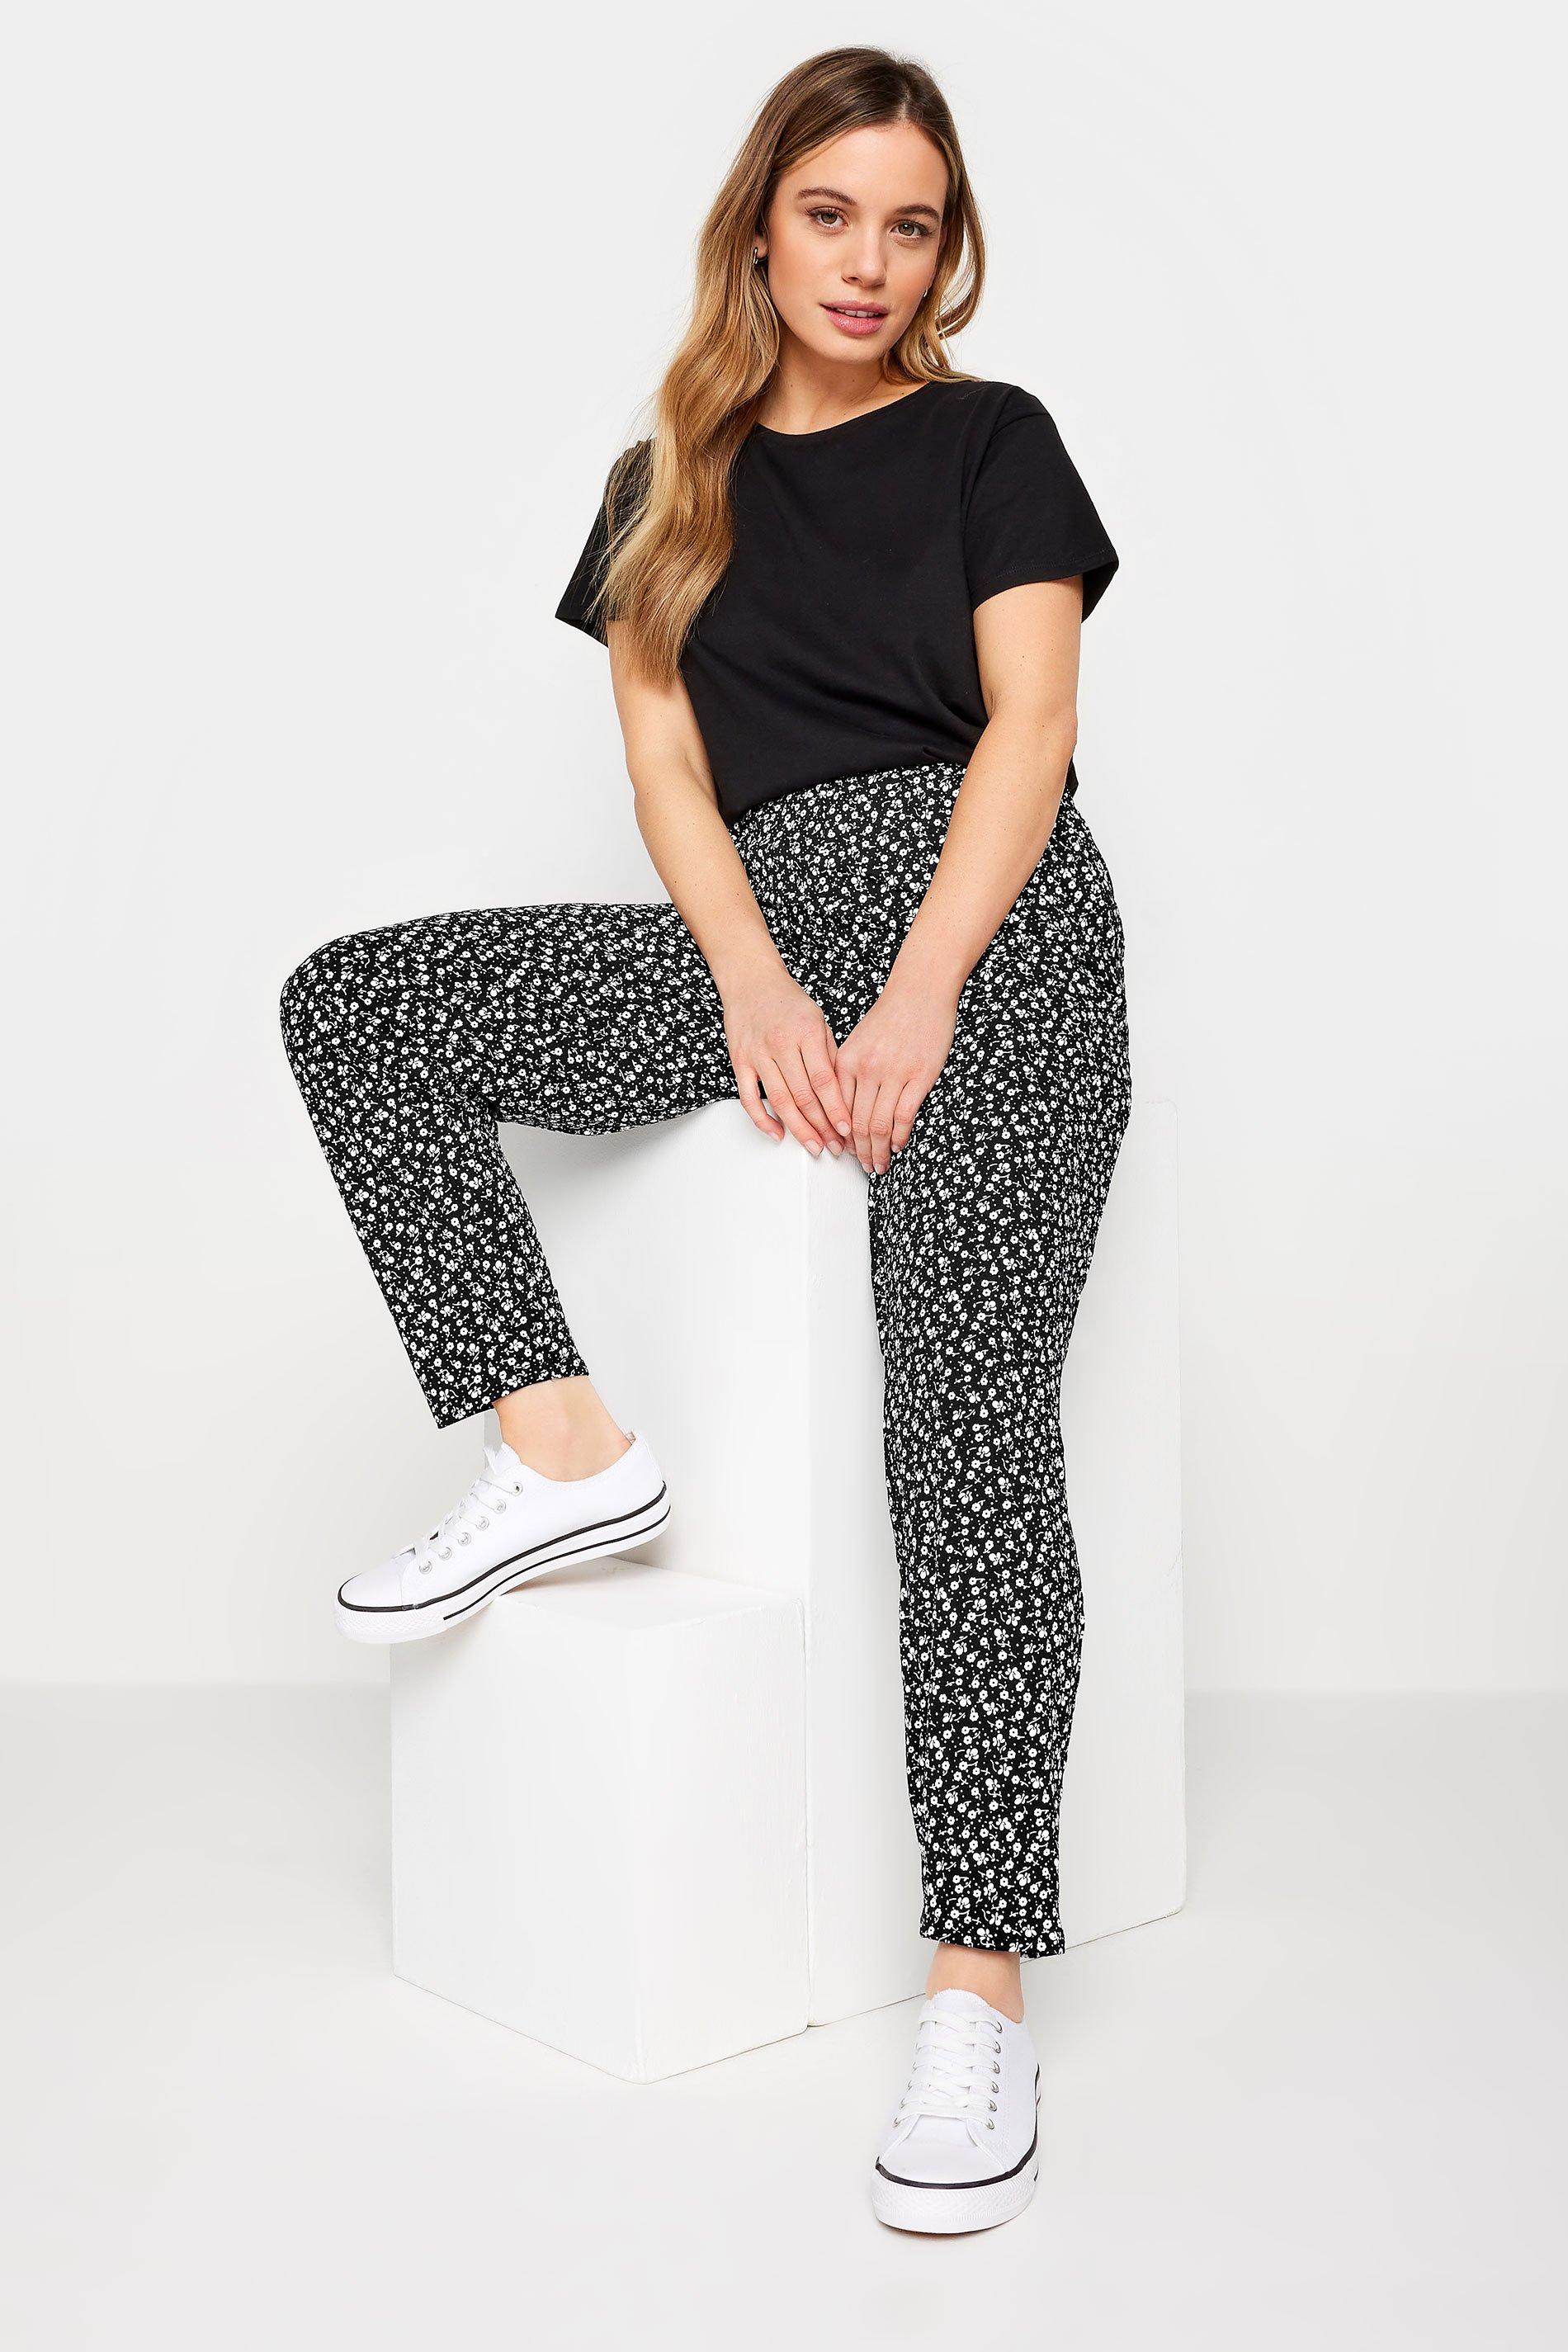 Buy Dorothy Perkins Printed Trousers online - Women - 2 products | FASHIOLA  INDIA